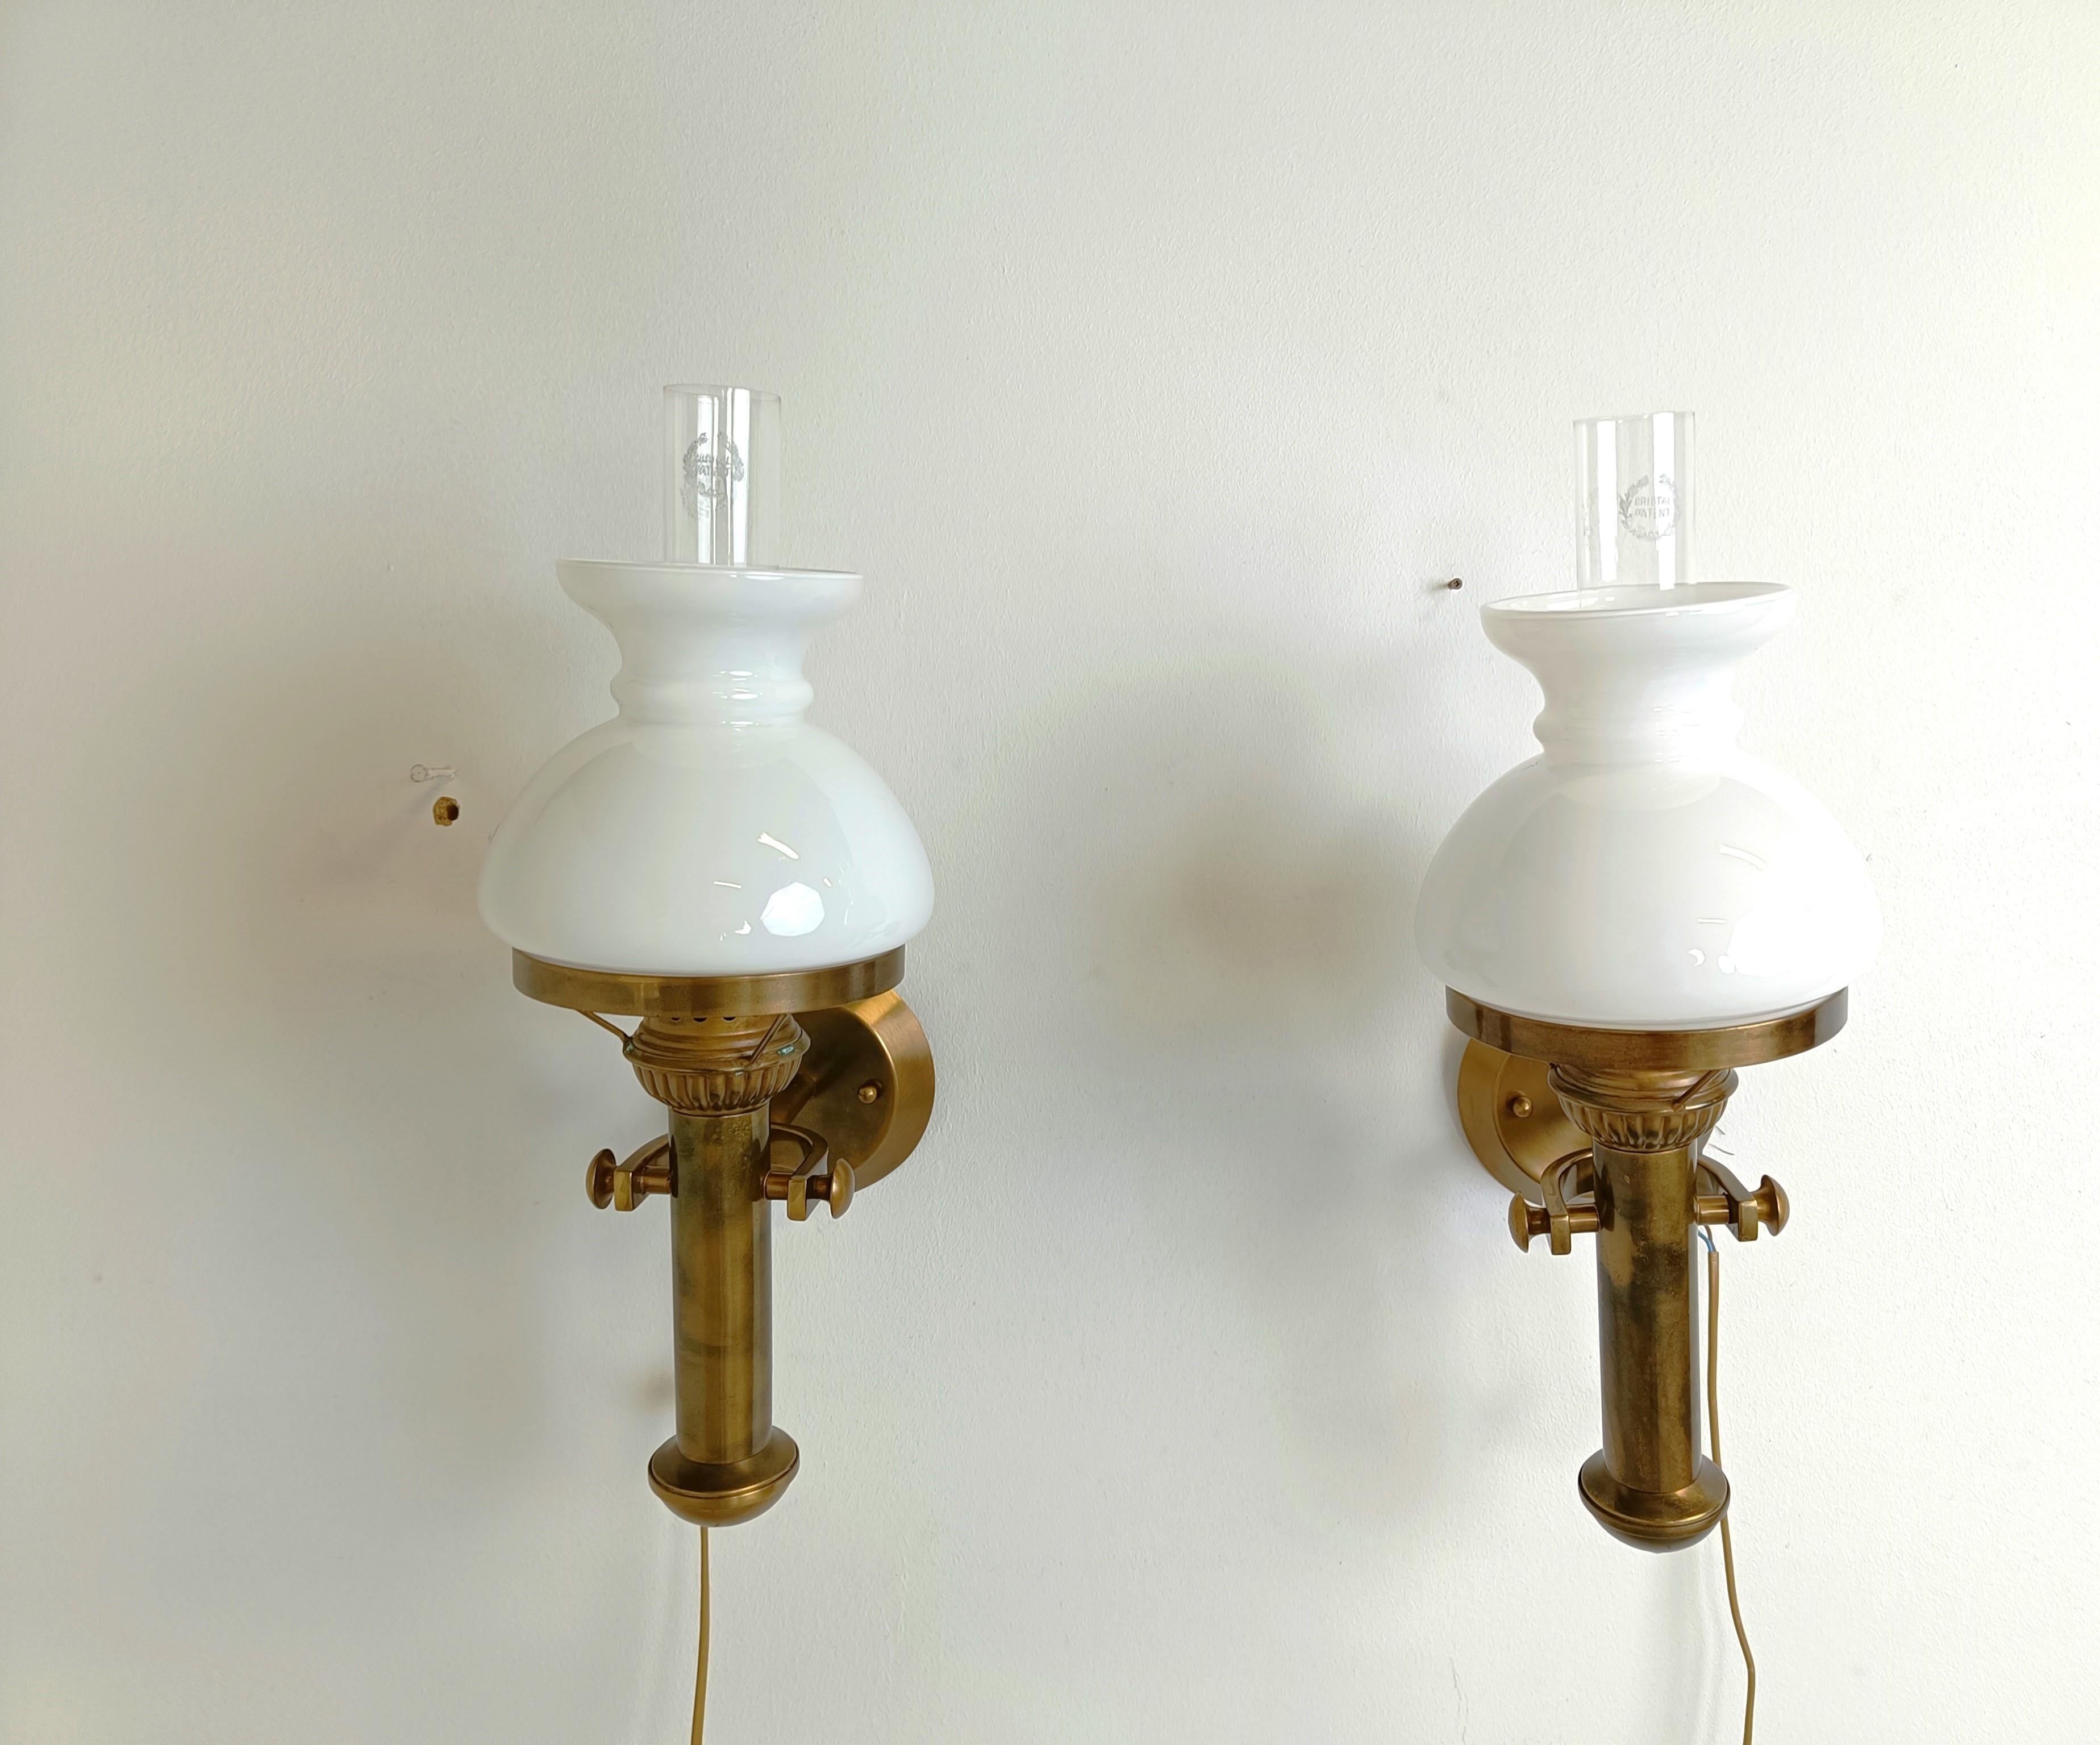 Very charming pair of brass, crystal and opaline wall sconces made in Italy.

Good condition

Work with regular E14 light bulbs. 

1960s - Italy

Dimension:
Height: 48cm/18.89